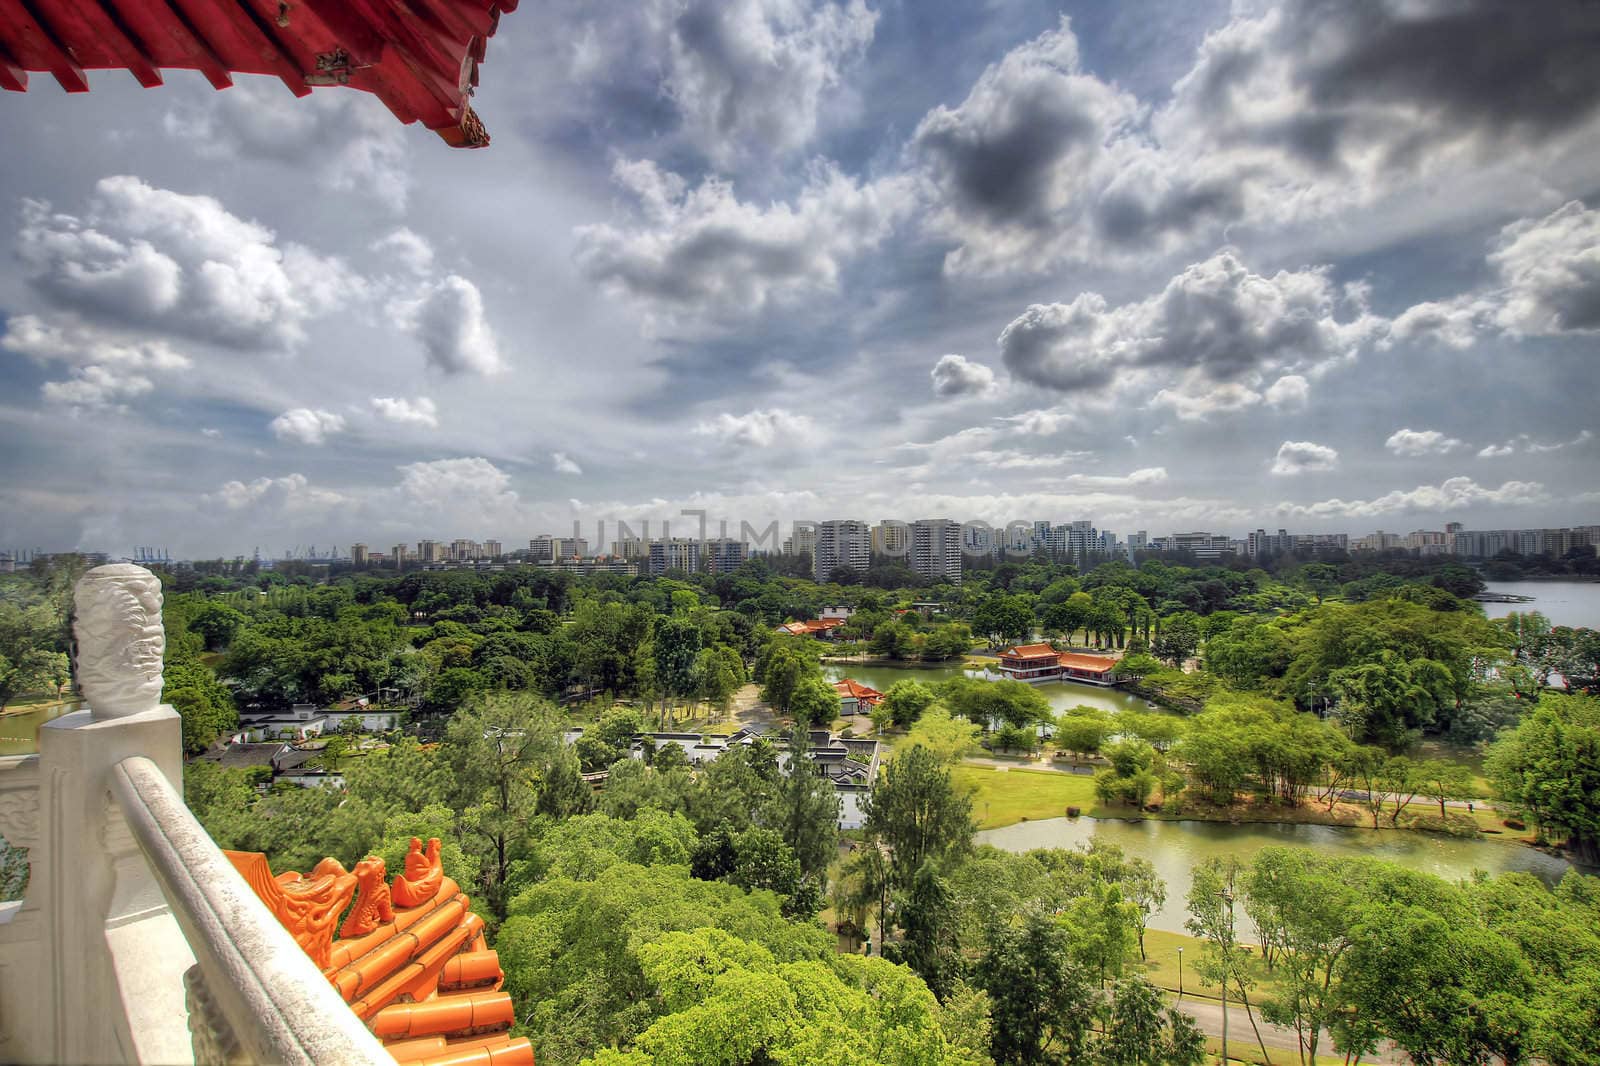 View from the top of the Pagoda in Chinese Garden